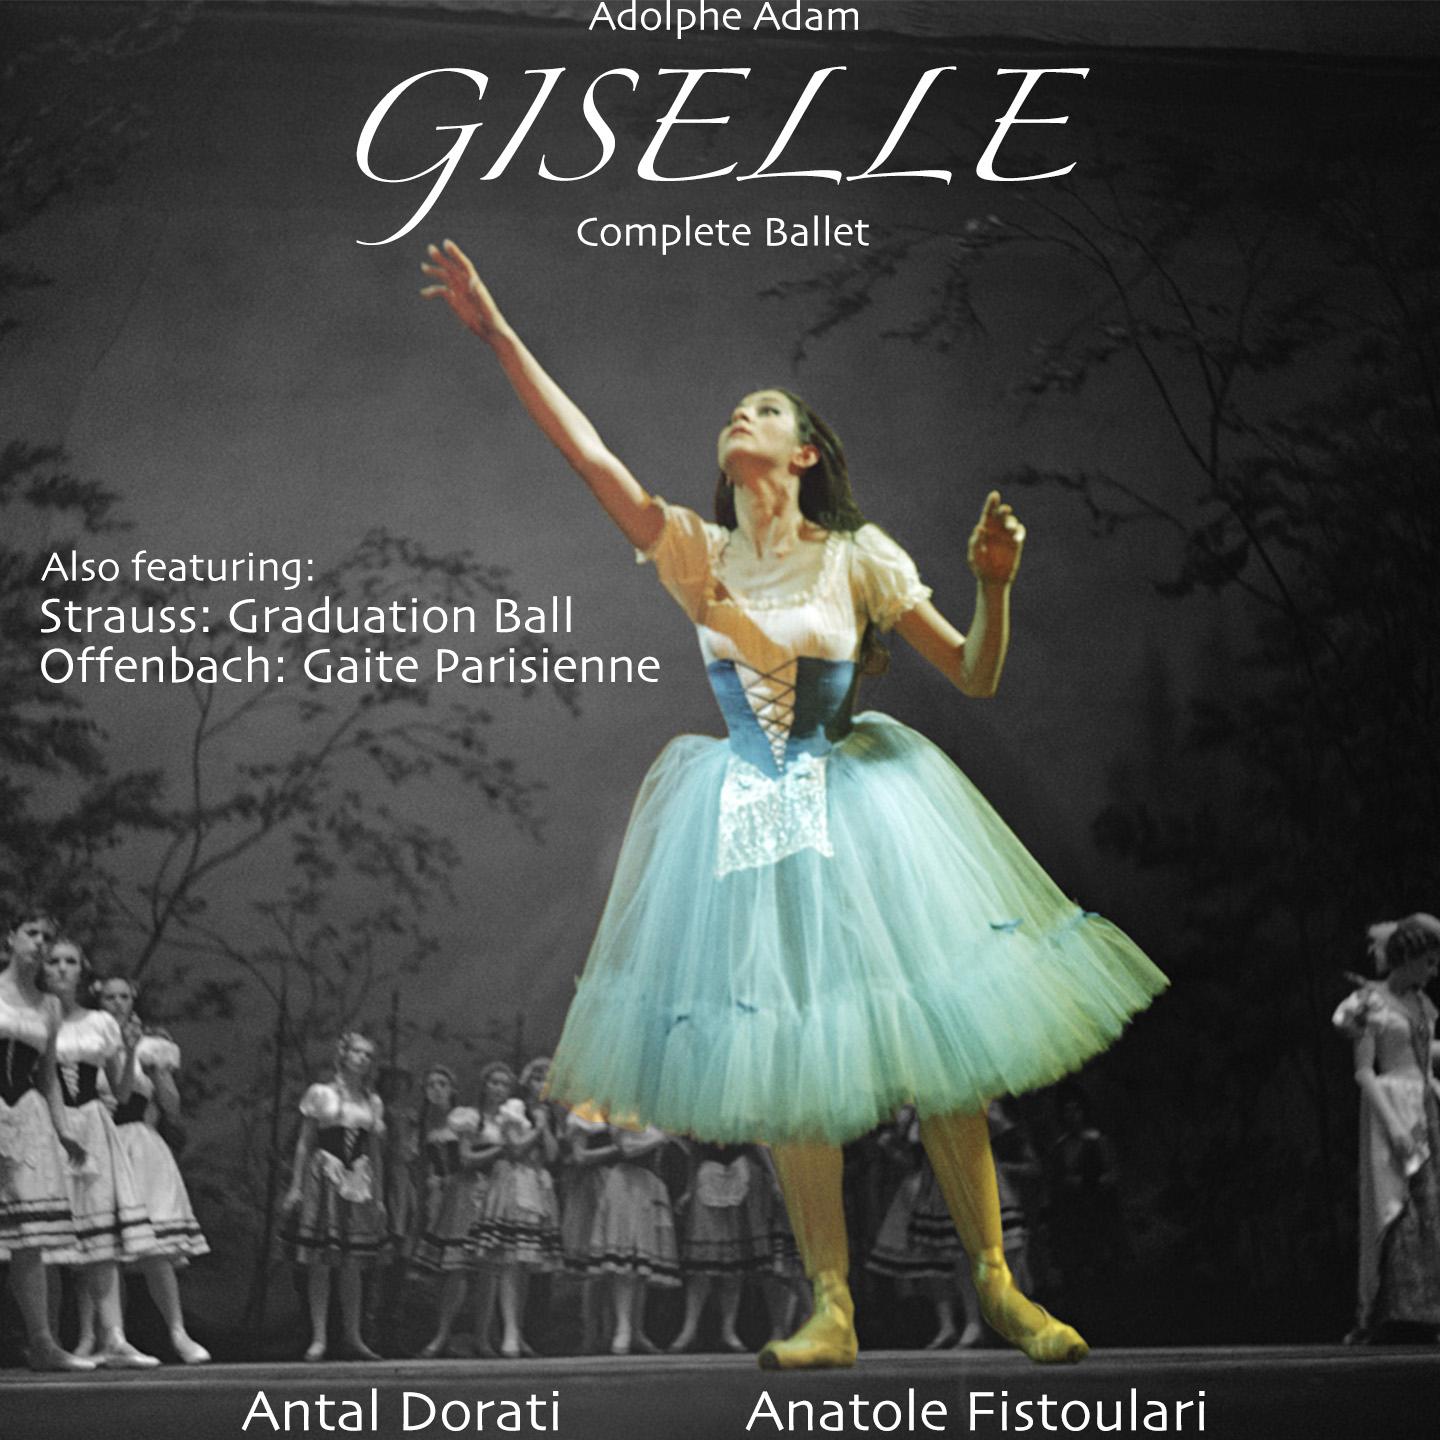 Giselle: Act 1: 5a. Entry of Giselle's Mother - The Hunt (I)